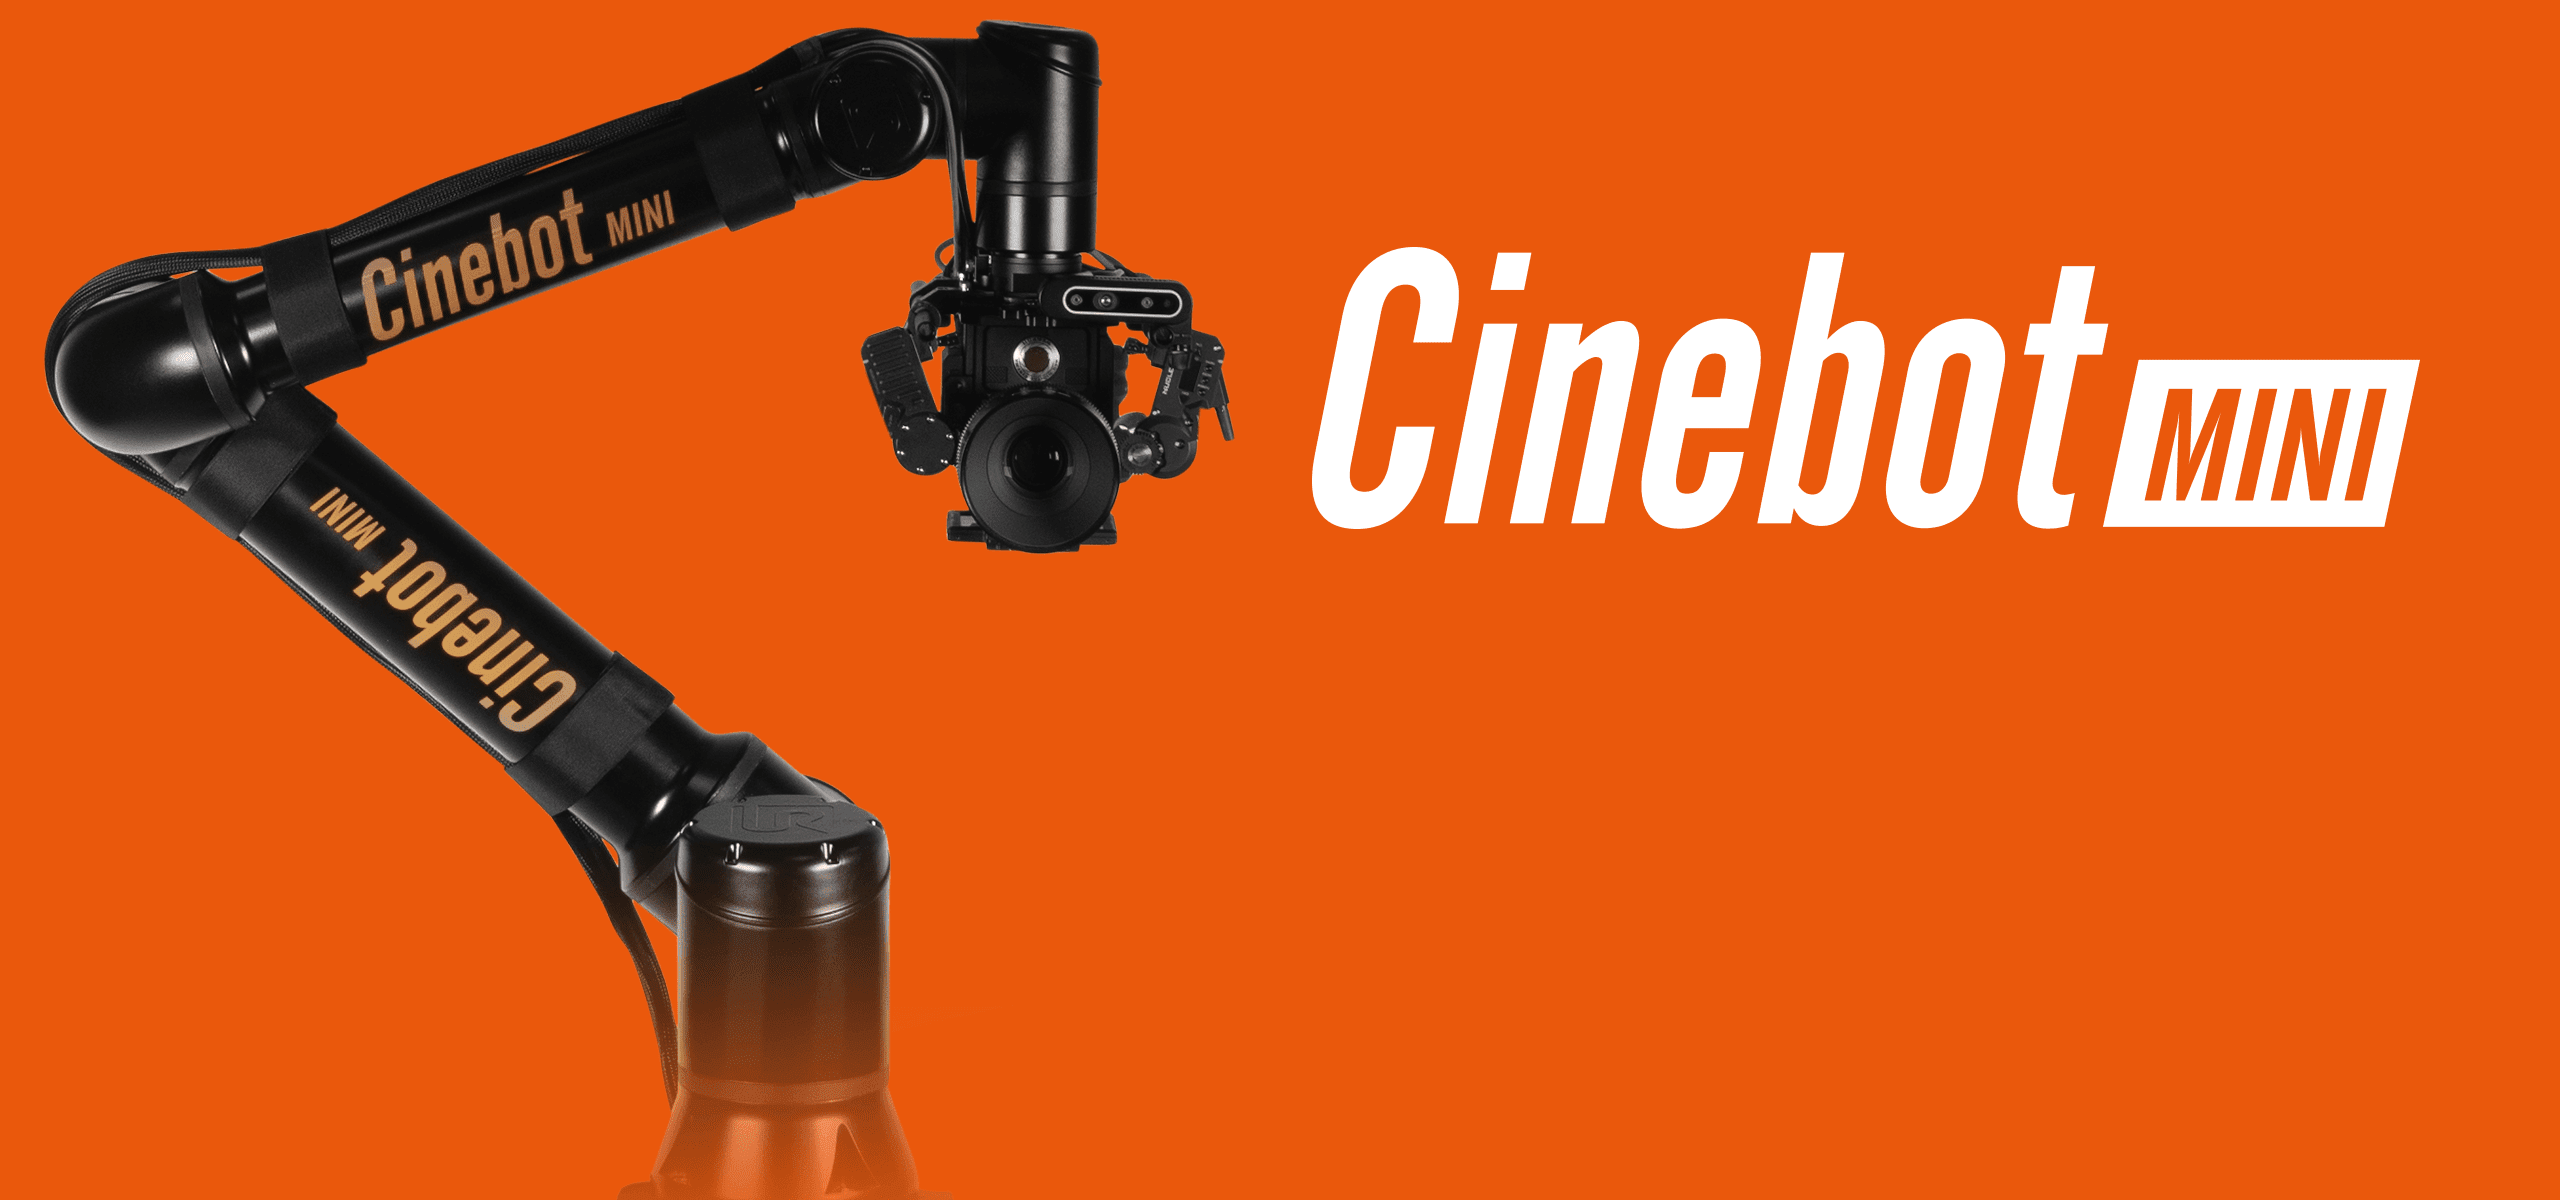 The Cinebot Mini in action, capturing an intricate shot, as seen from the perspective of a filmmaker at the controls, showcasing the machine’s rental potential to enhance any production